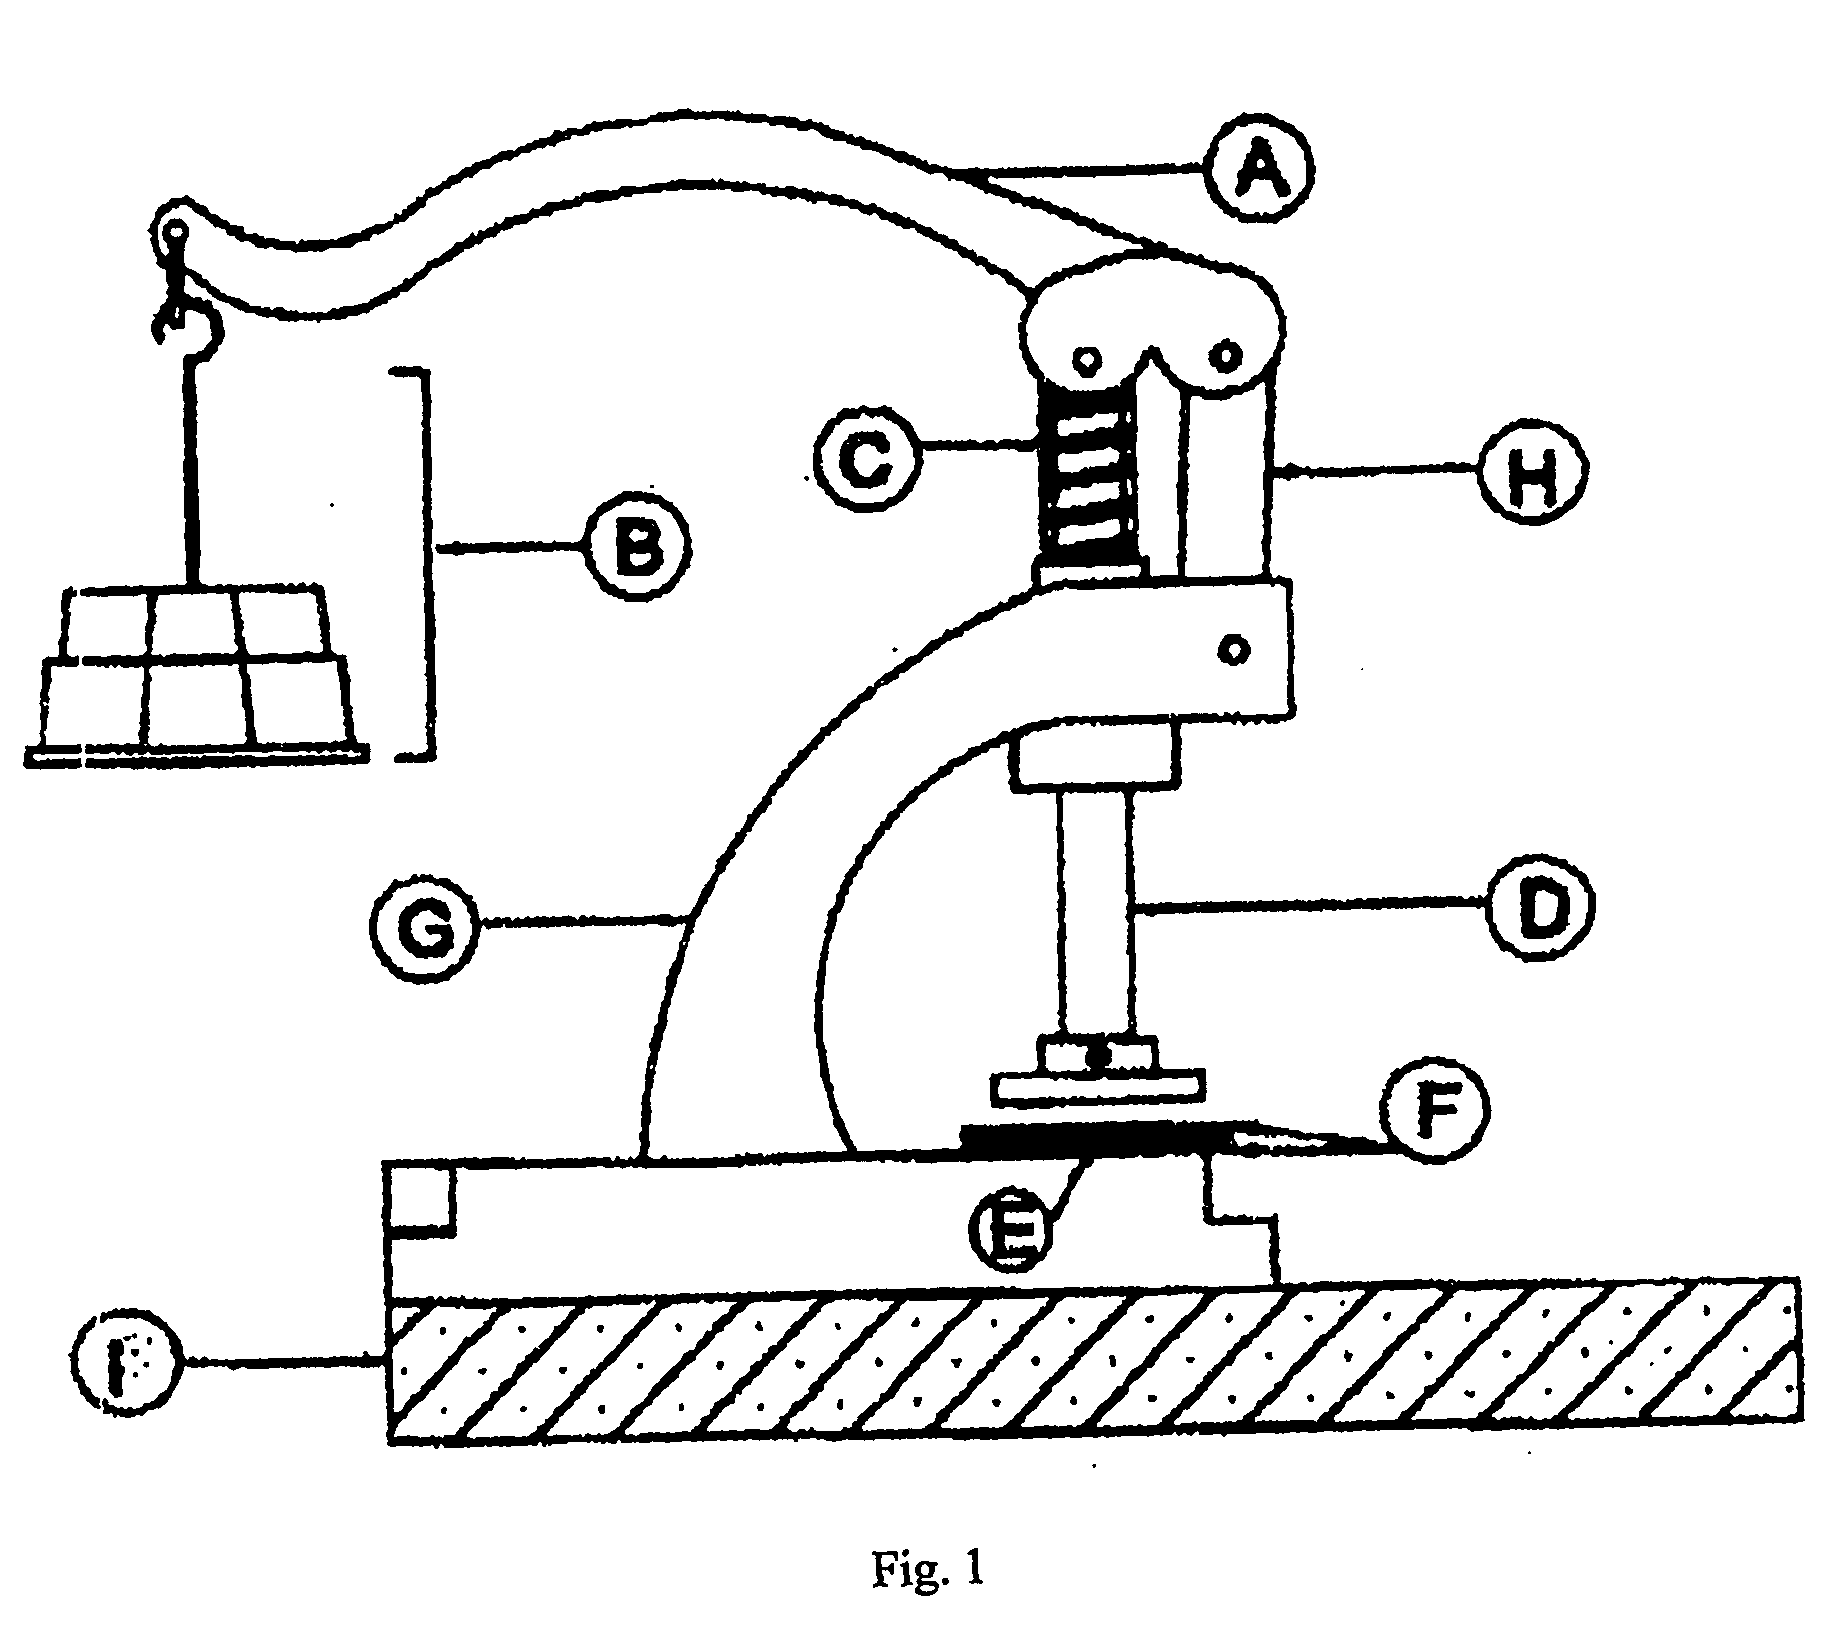 Method and Device for Measuring the Texture of Cooked Grains